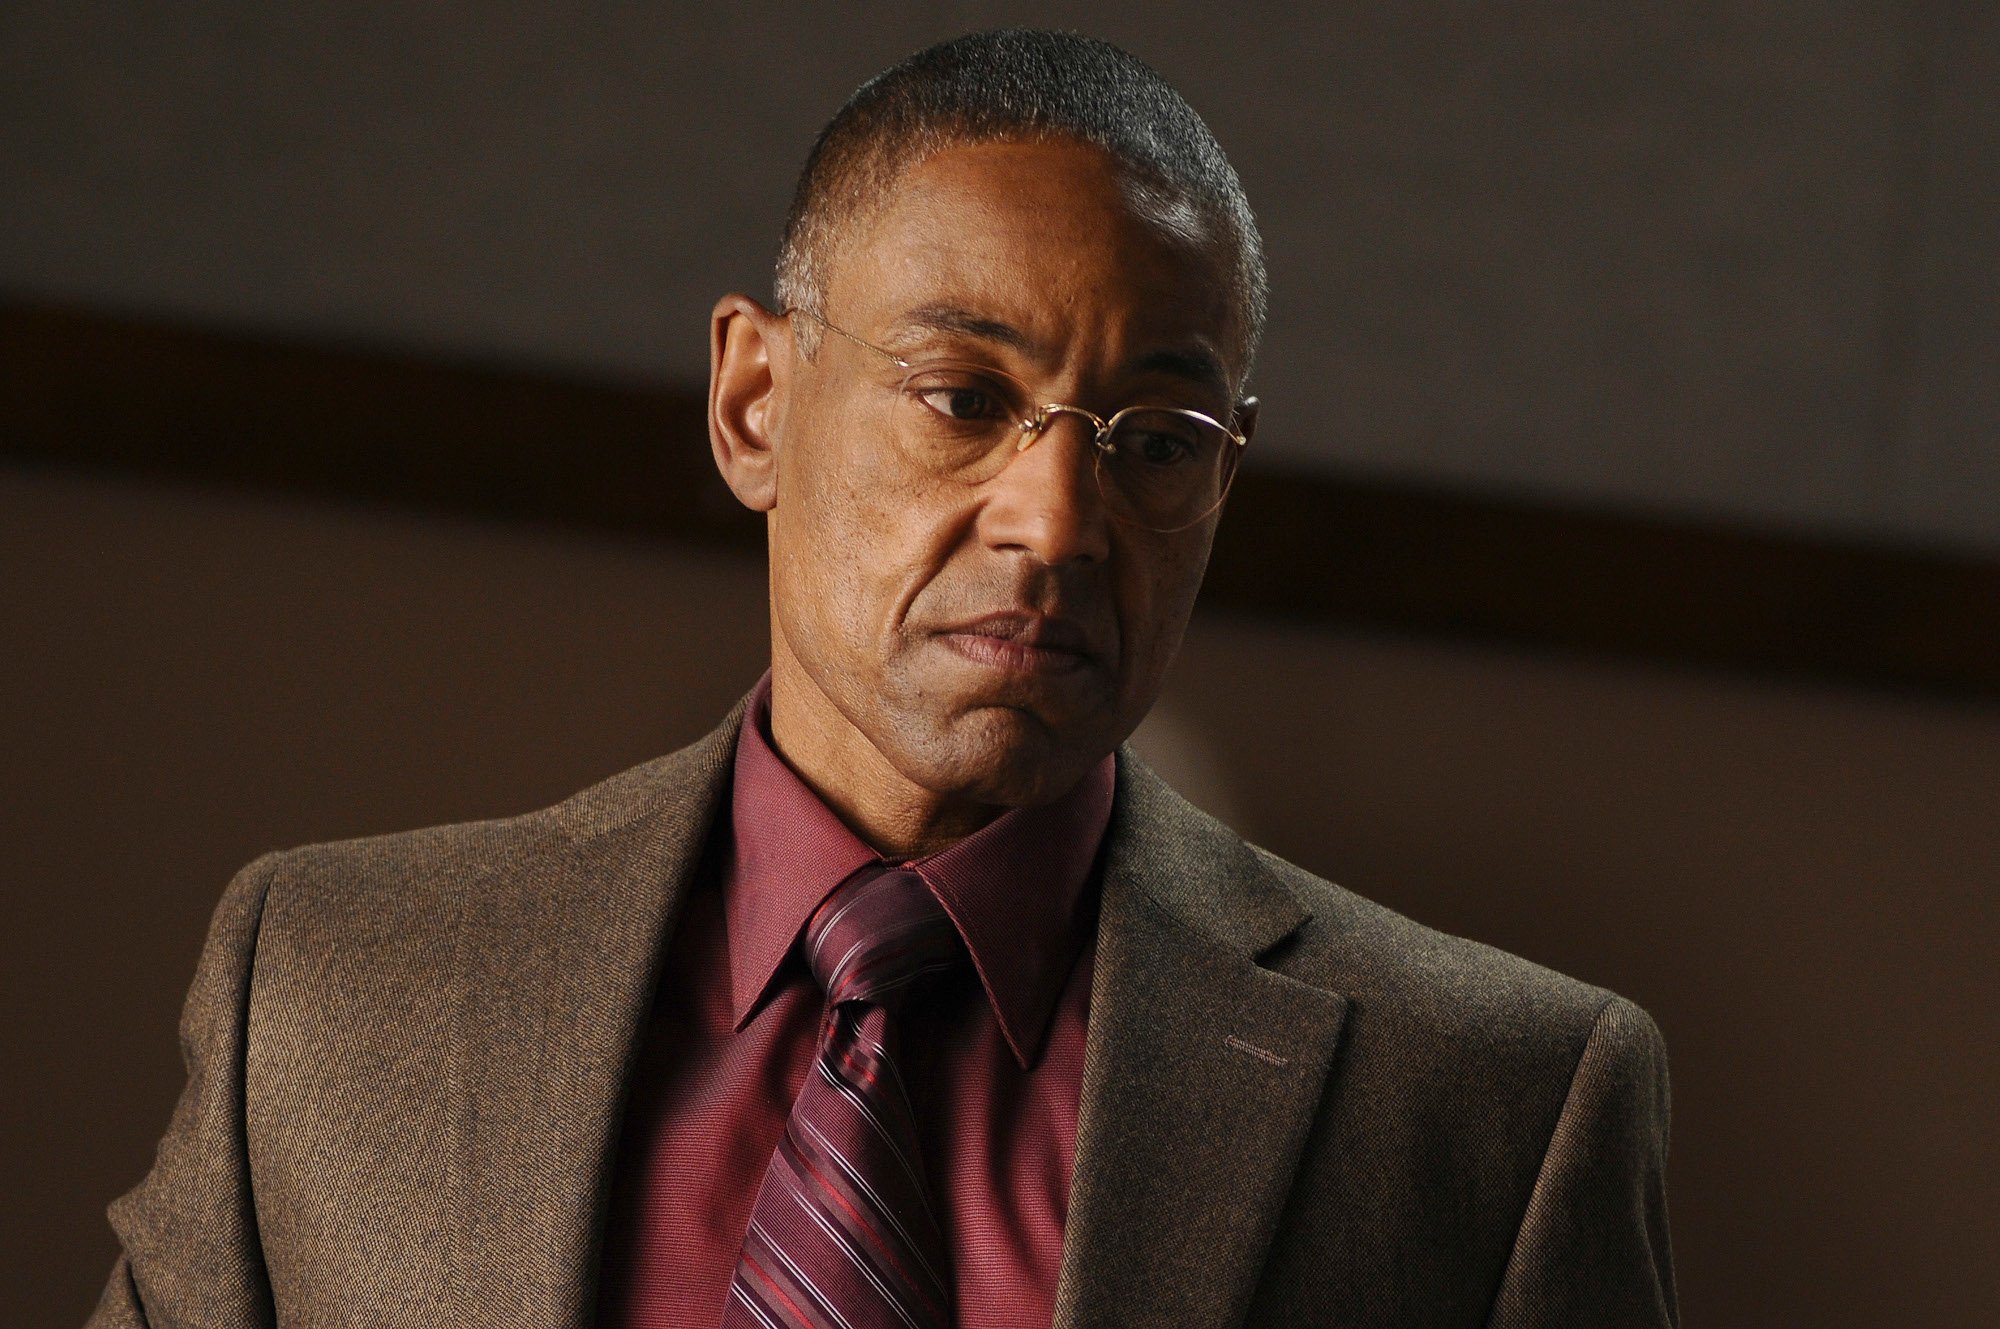 Giancarlo Esposito as Gus Fring in 'Breaking Bad' Season 4. He's wearing a suit and looks displeased.